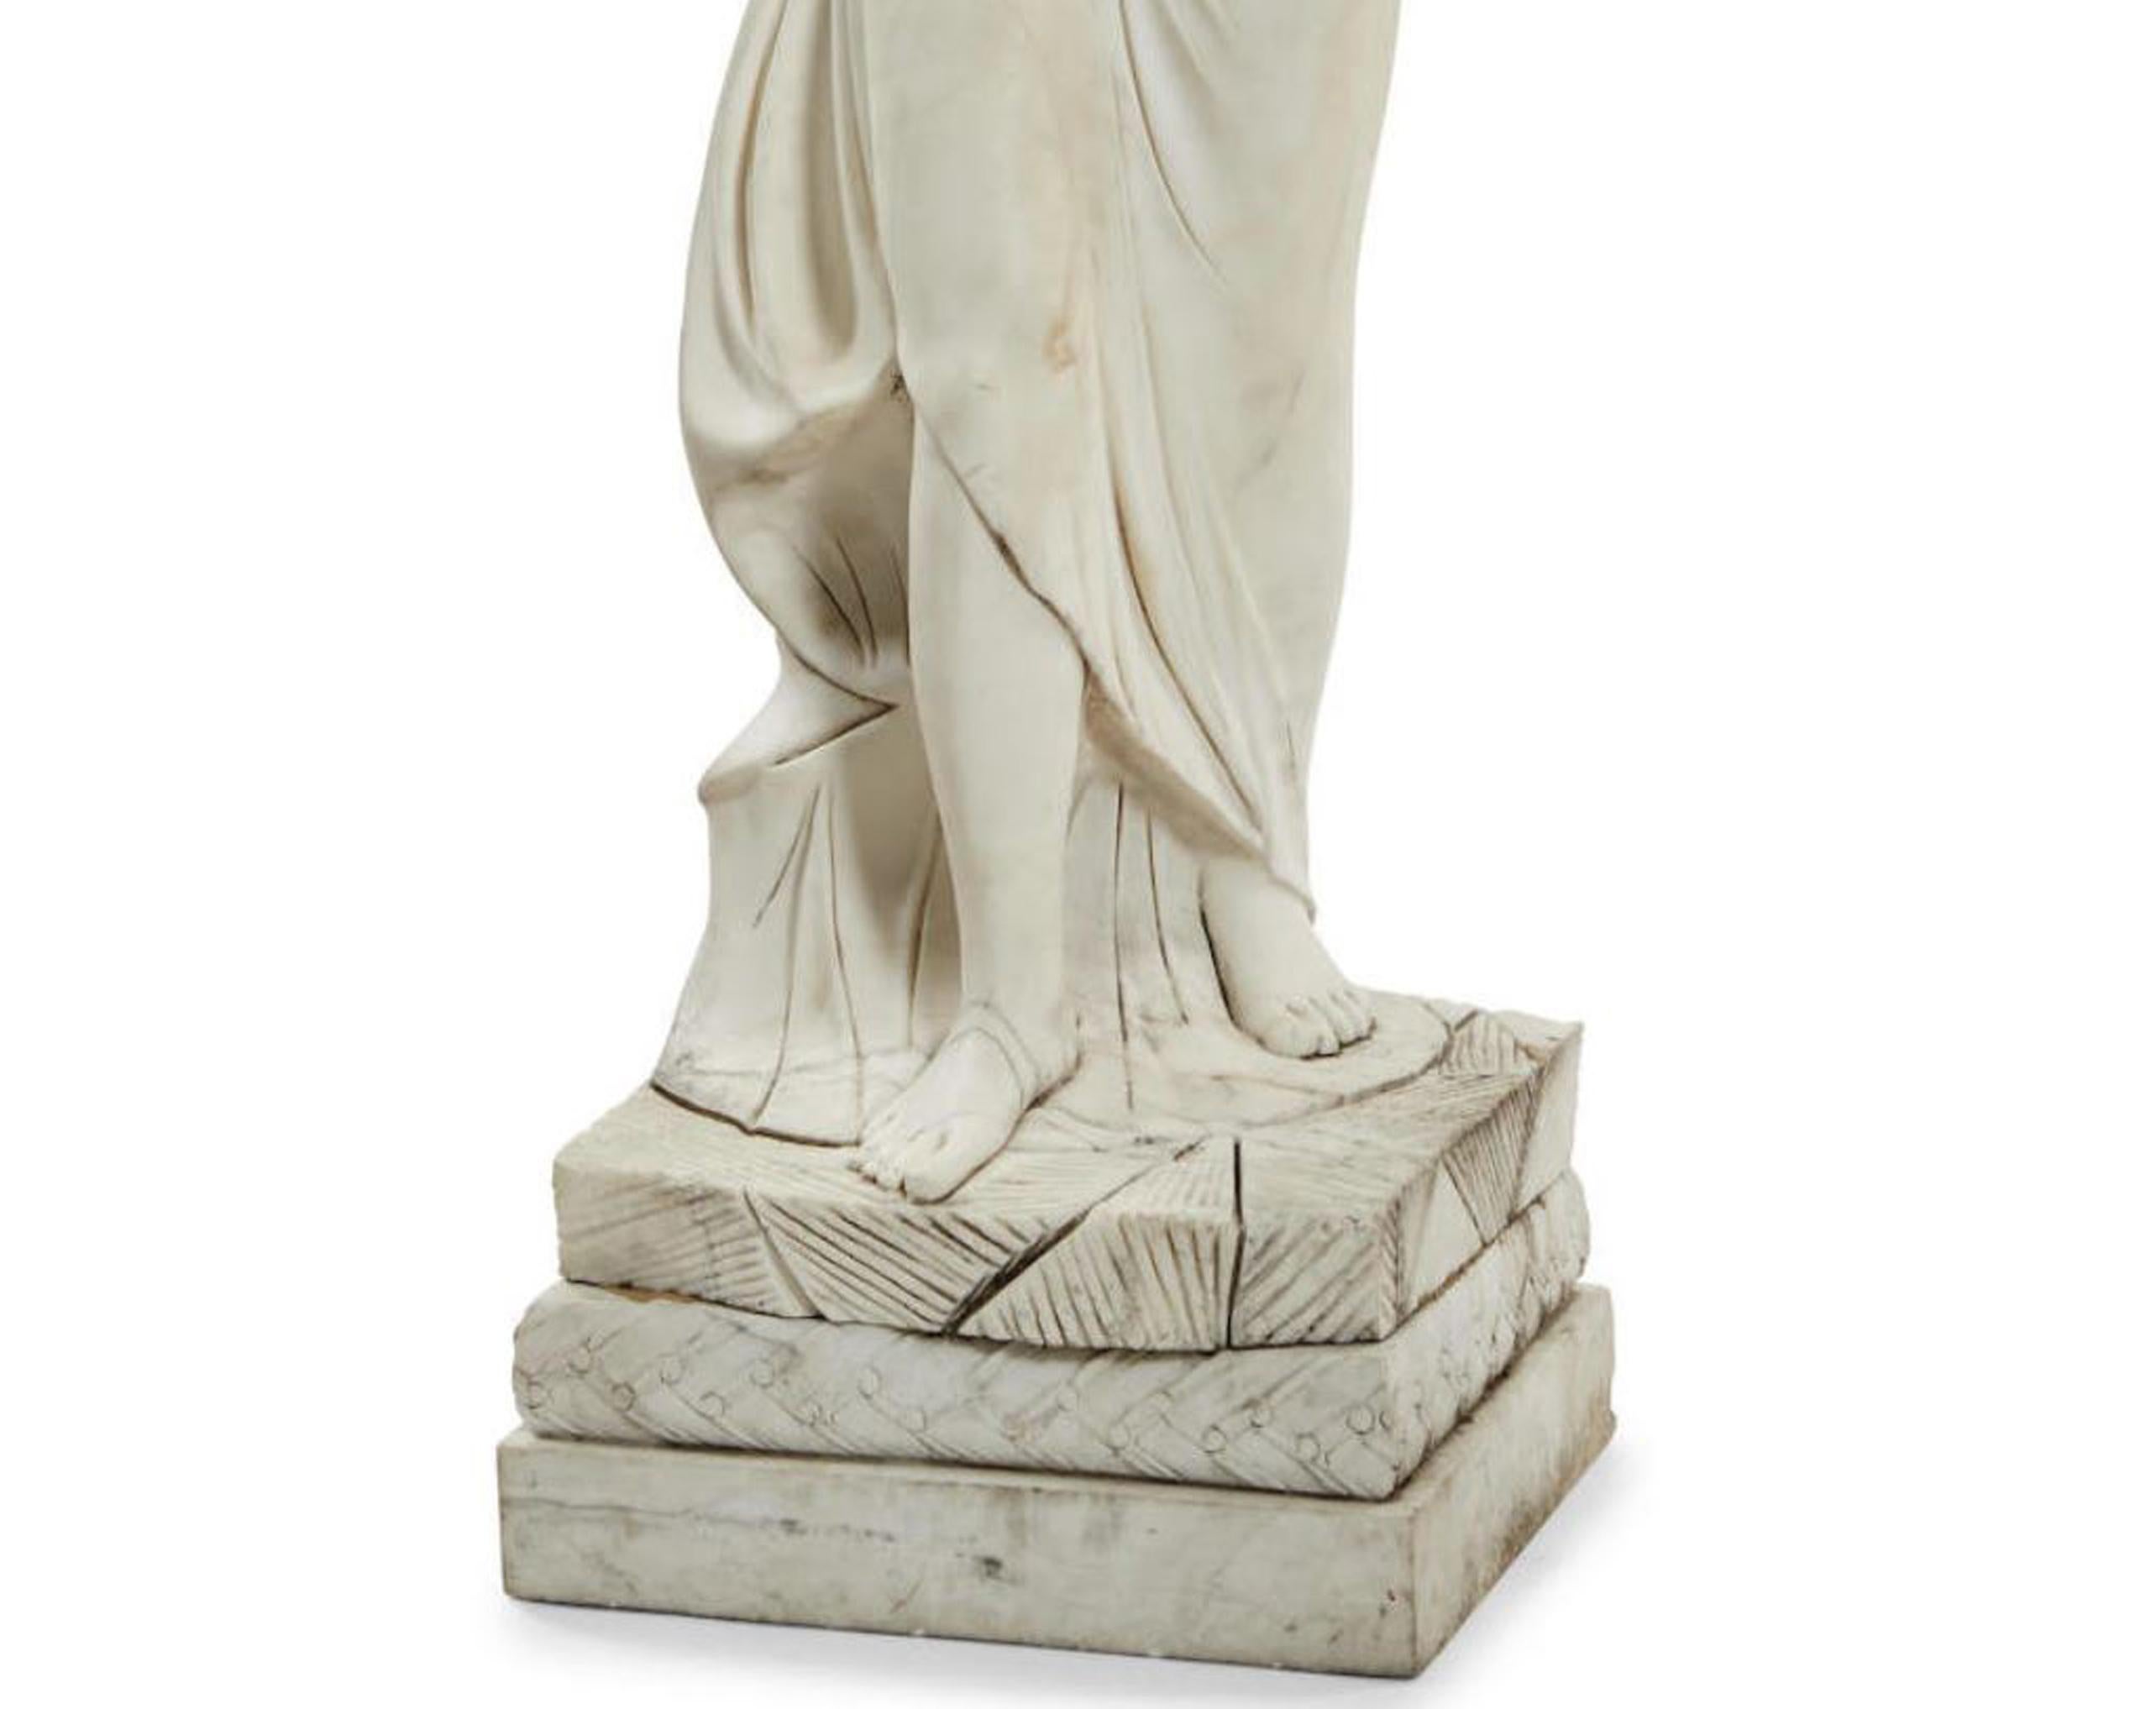 Hand-Carved Italian Carved Marble Statue of a Maiden